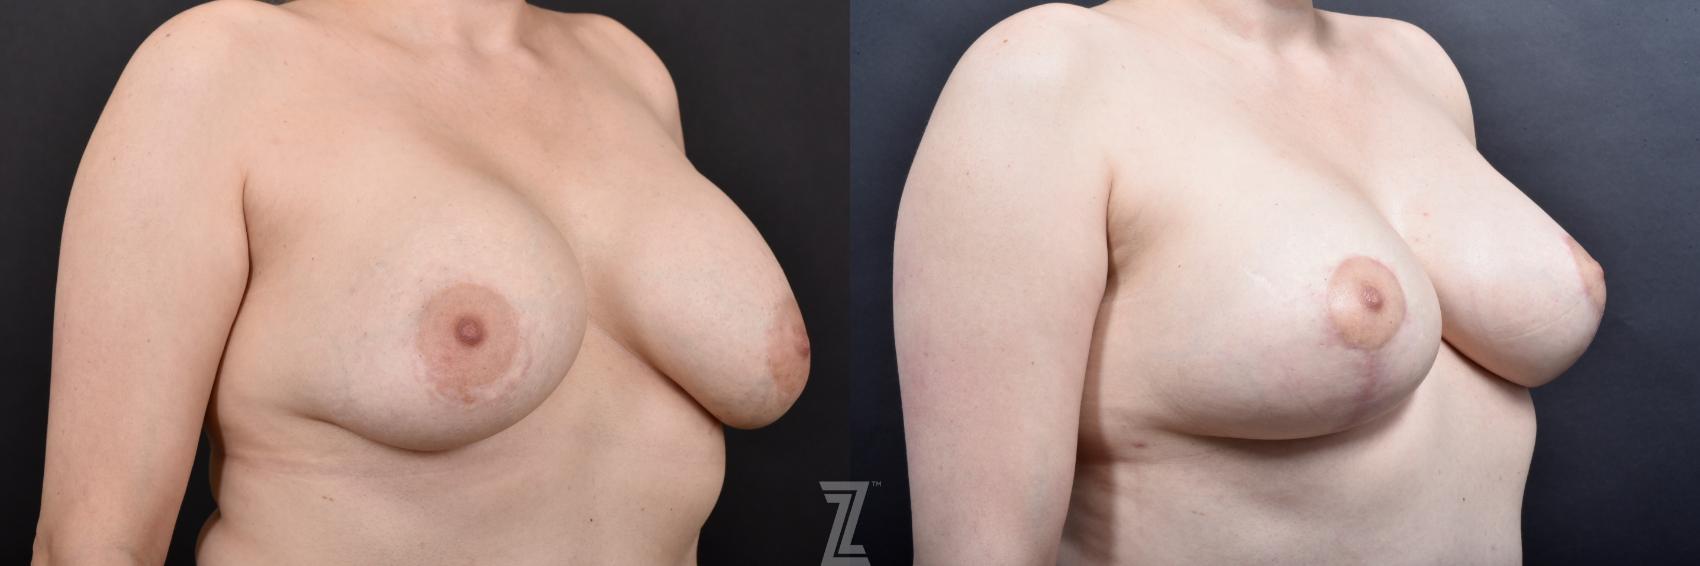 Breast Augmentation Revision Before & After Photo | Austin, TX | The Piazza Center for Plastic Surgery & Advanced Skin Care